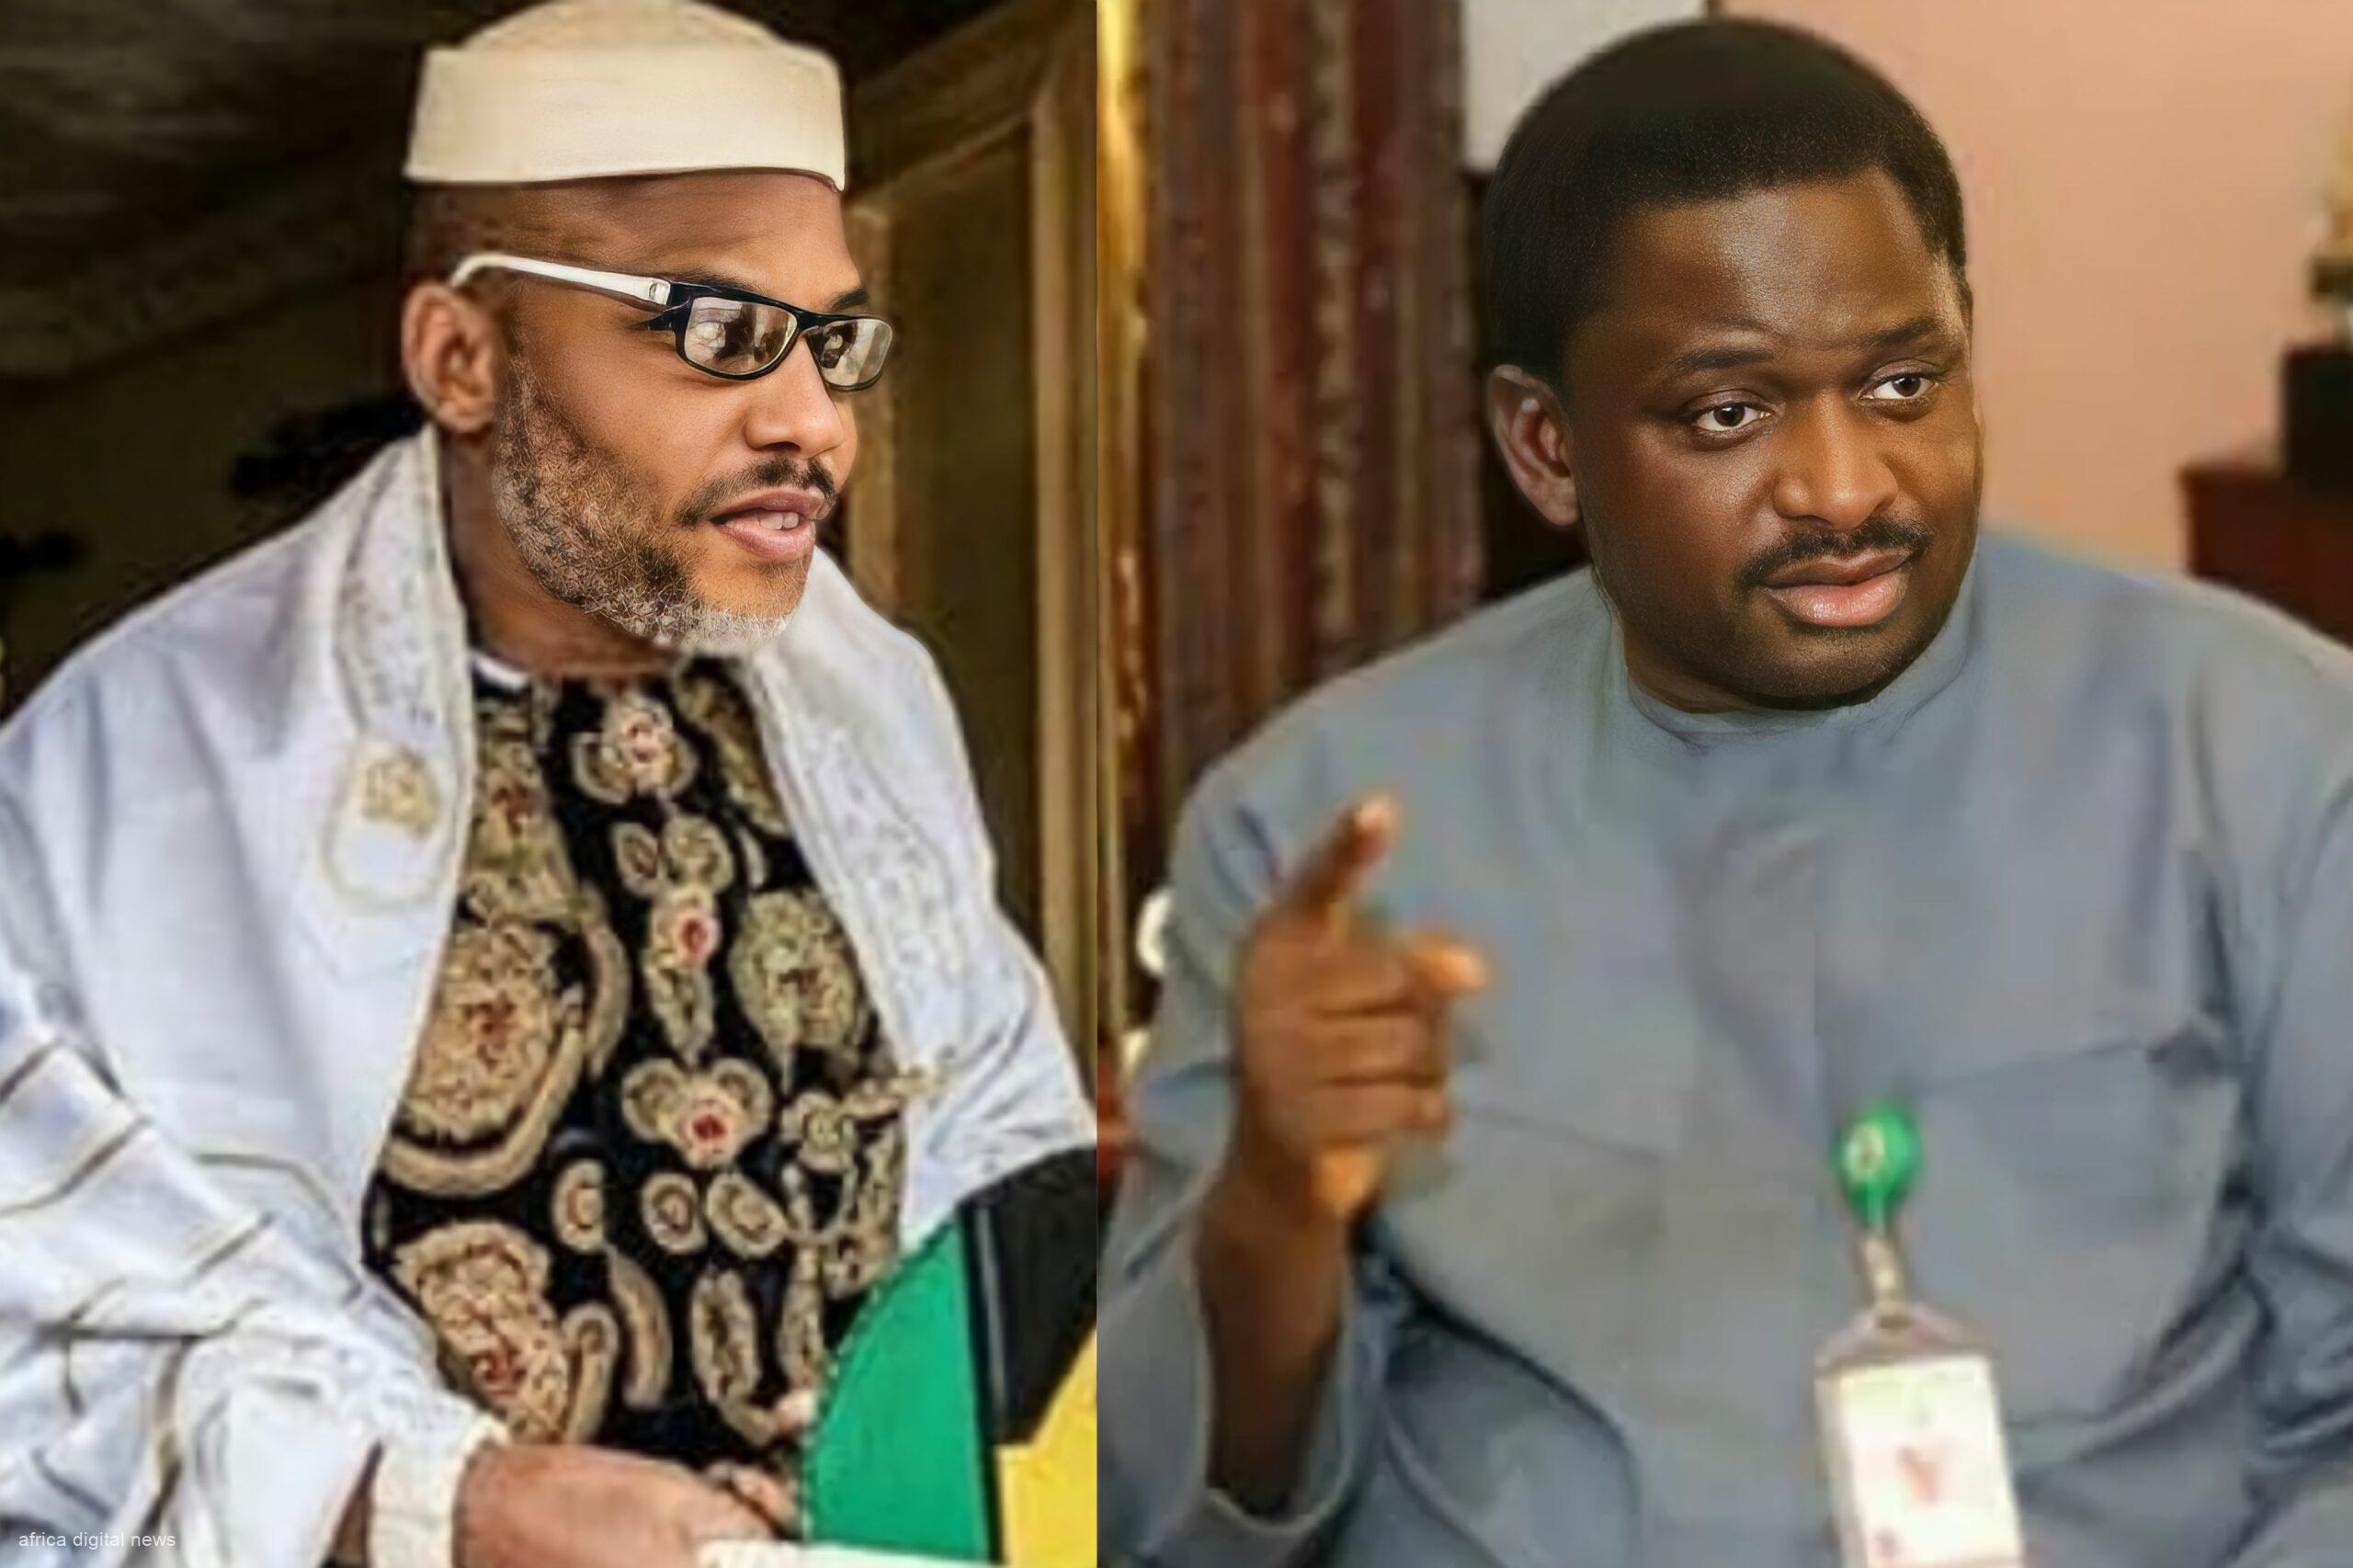 A Stain On Justice: Adesina's Vile Claims And Kanu's Ordeal